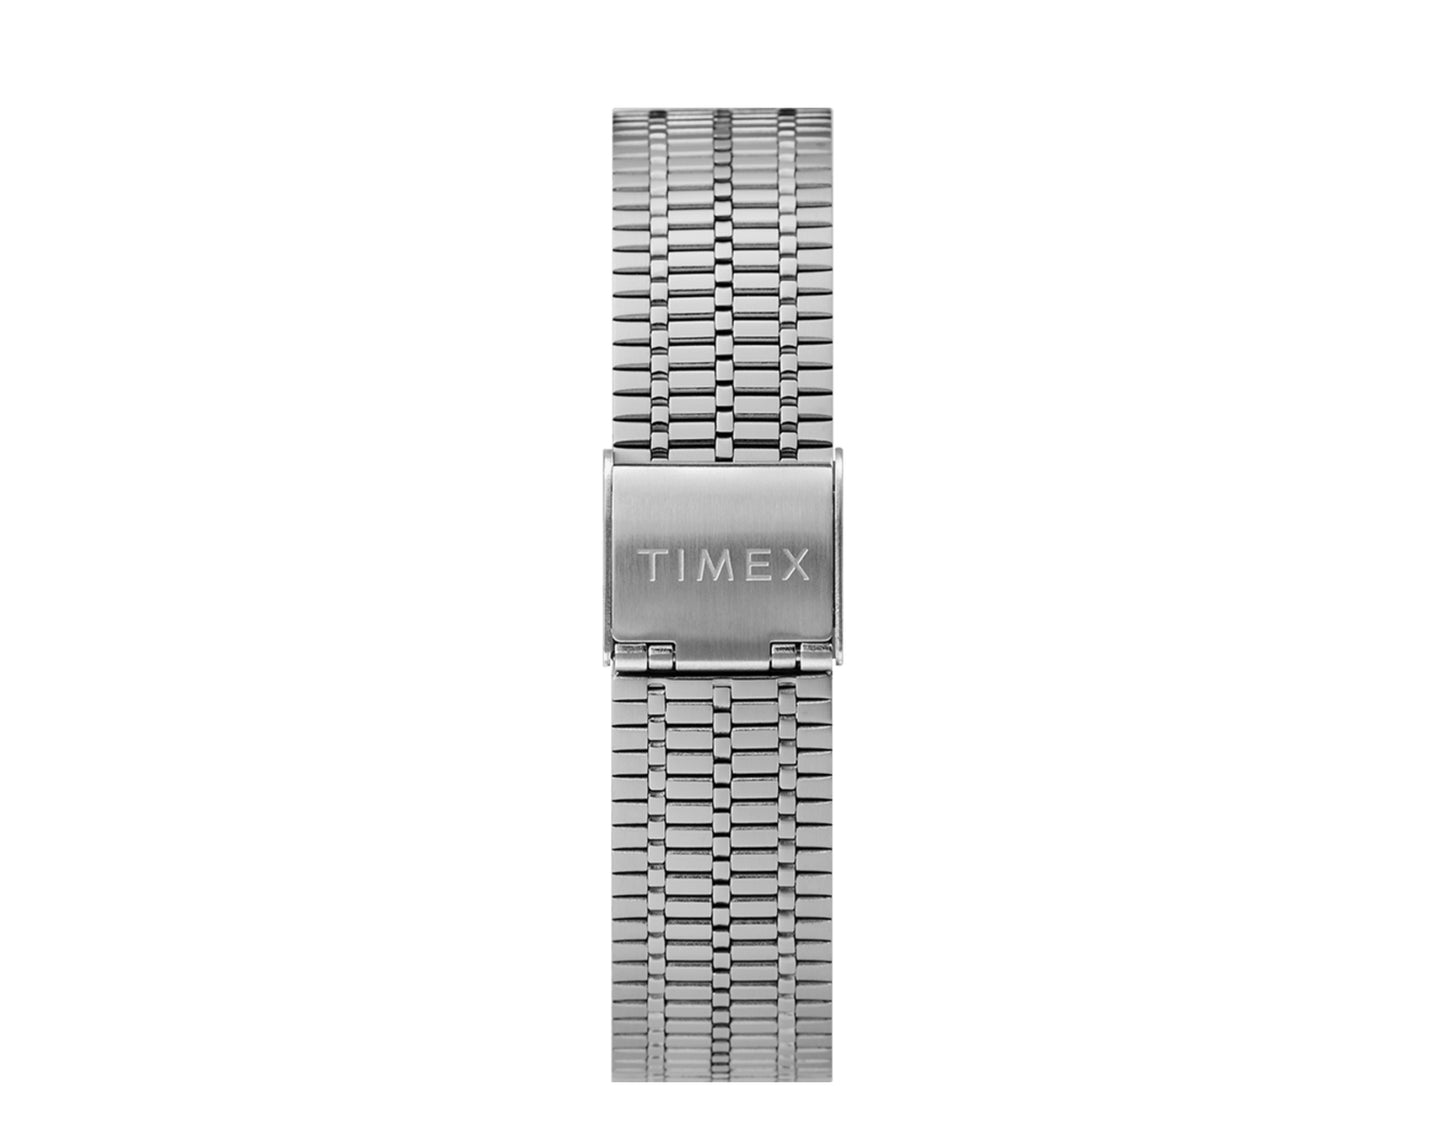 Timex Q Reissue x Snoopy Peanuts 70th Anniversary 38mm Stainless Steel Bracelet Watch